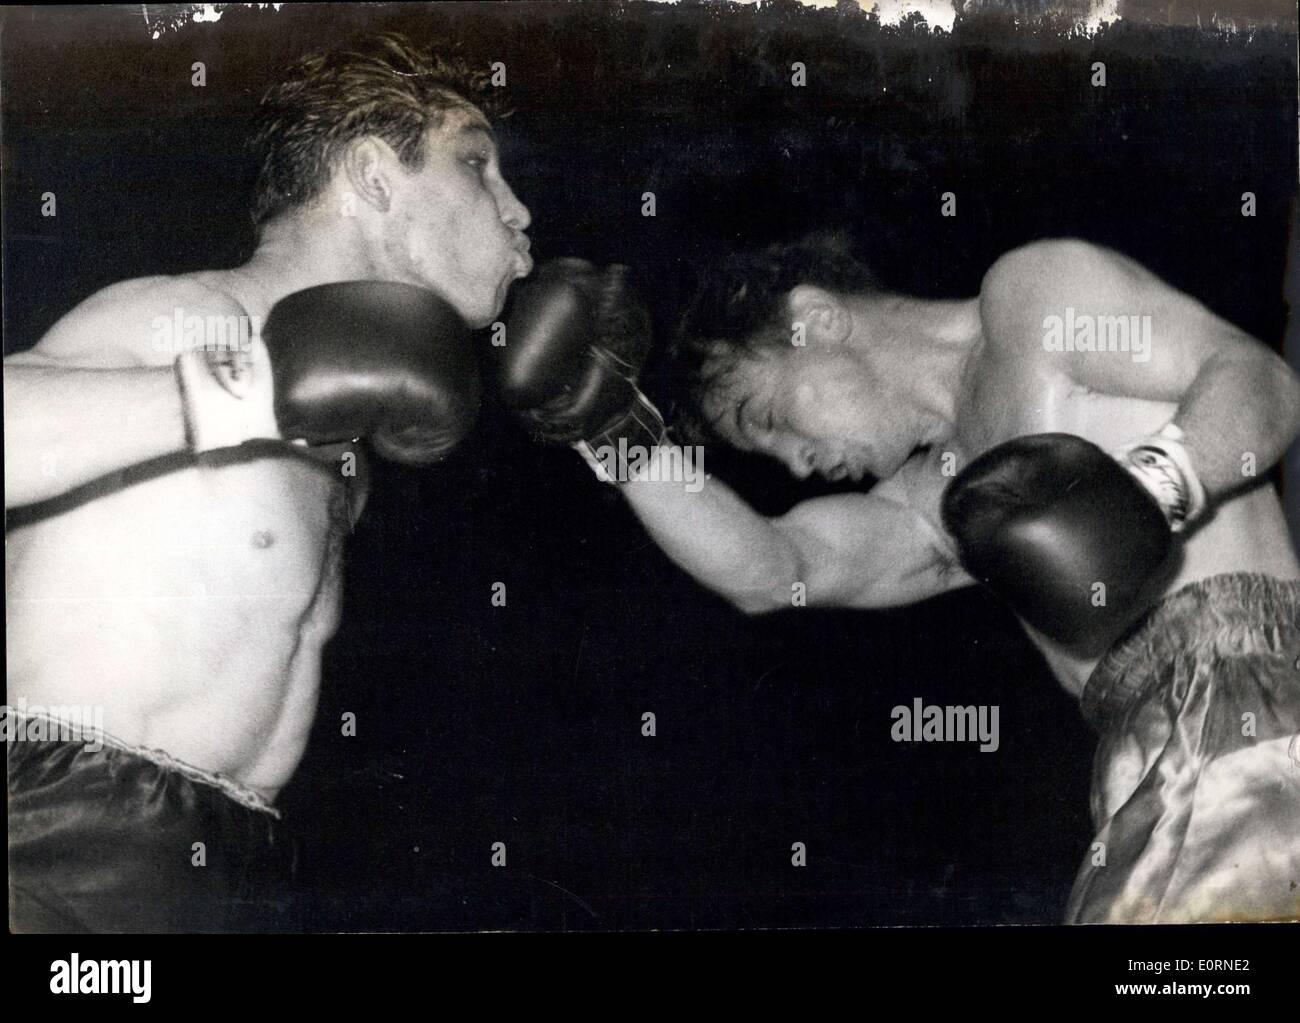 Feb. 02, 1960 - Wally Swift Becomes New British Welterweight Champion Wins On Points At Nottingham: Wally Switft of Nottingham last night won the British Welterweight Championship - when he beat reigning champion Tommy Molloy of Liverpool - on points over 15 rounds - at Nottingham. Photo Shows: Wally Swift (left) takes a crunching right hook to the chin - from Tommy Molloy during their fight.. Swift won on points. Stock Photo